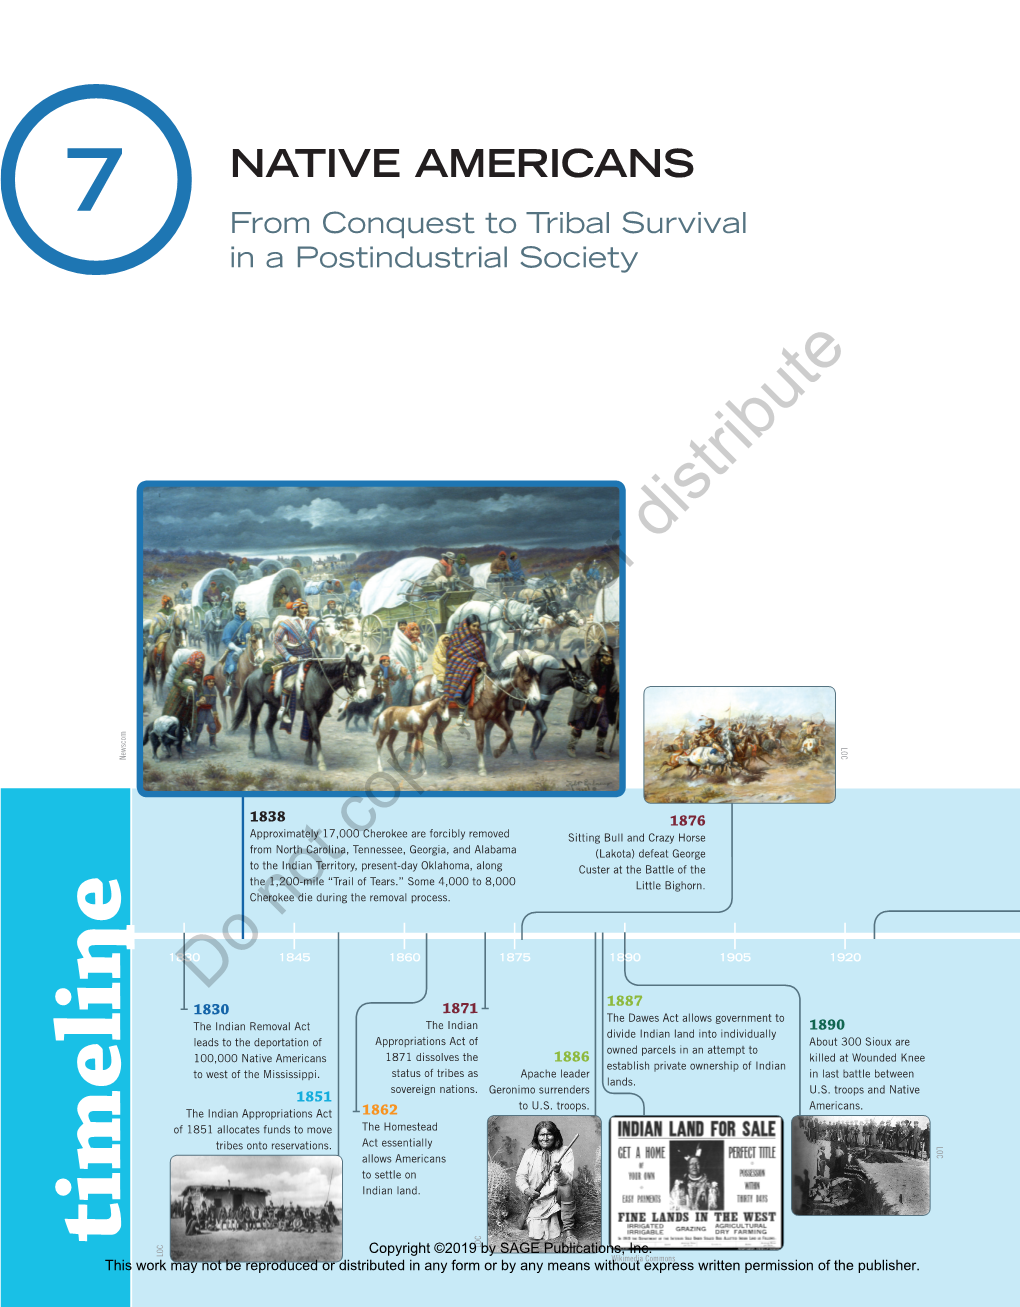 NATIVE AMERICANS 7 from Conquest to Tribal Survival in a Postindustrial Society